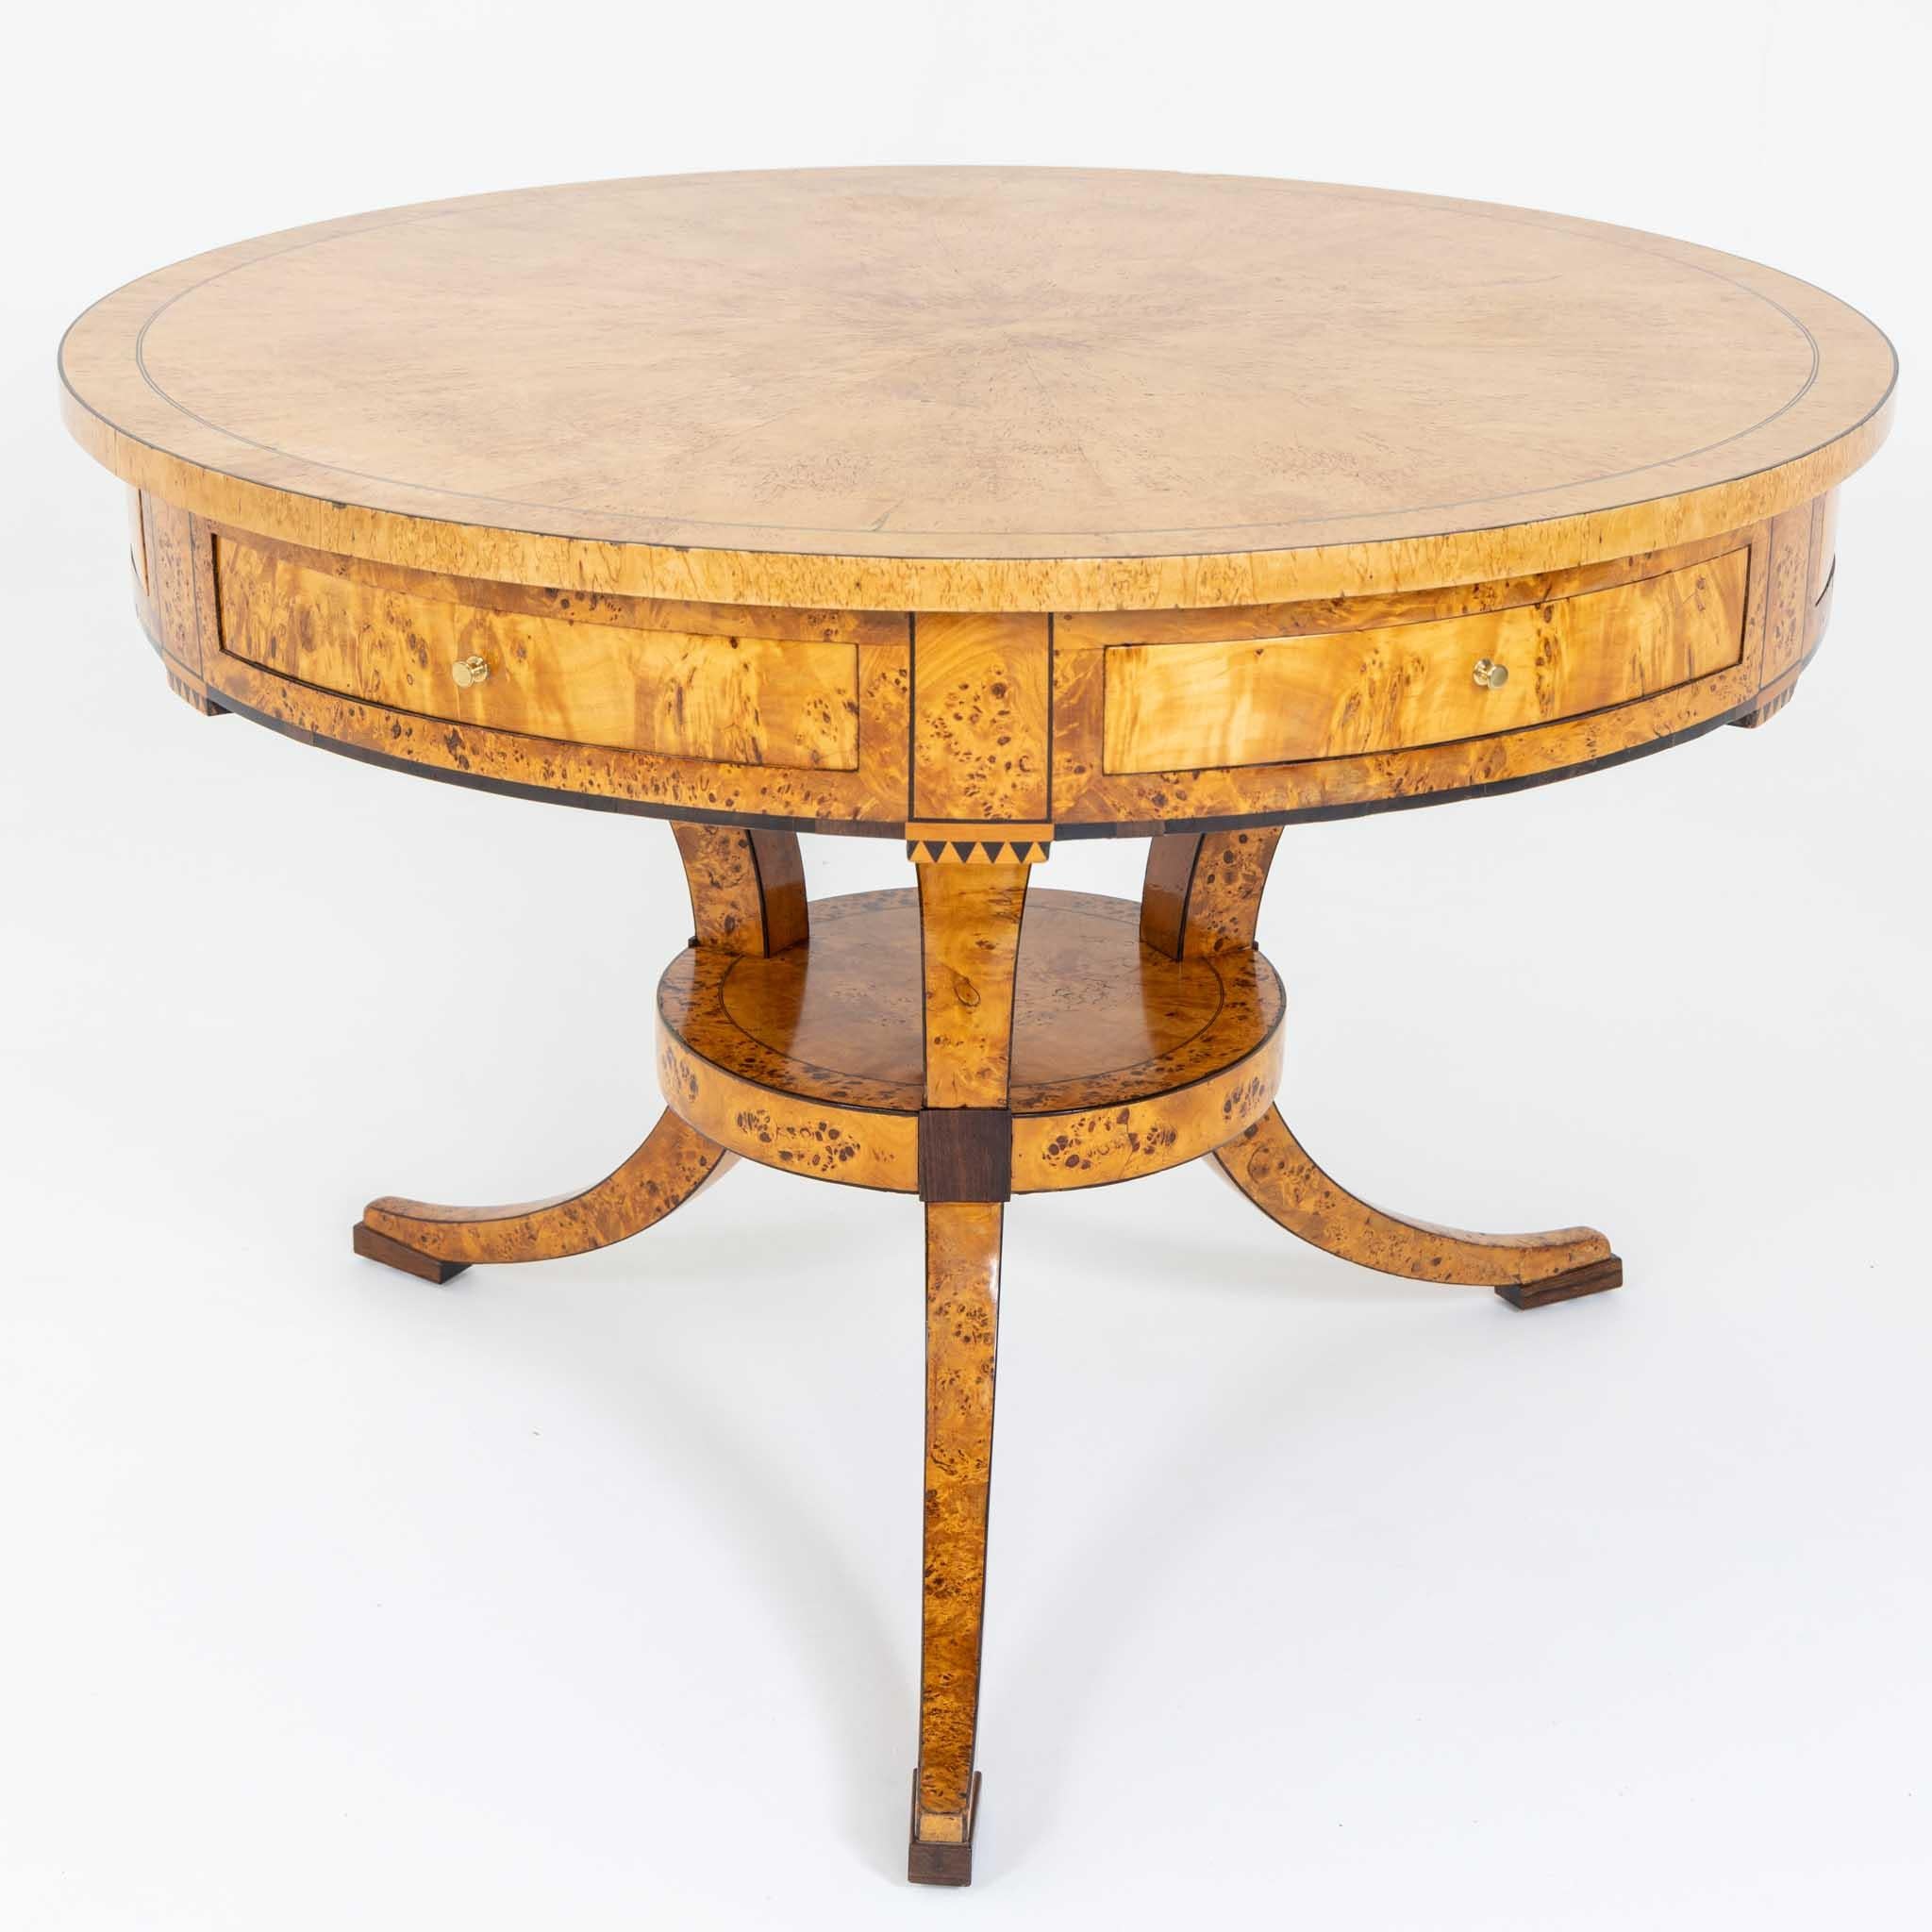 Biedermeier Game Table in Birch, Baltic States, early 19th Century For Sale 6